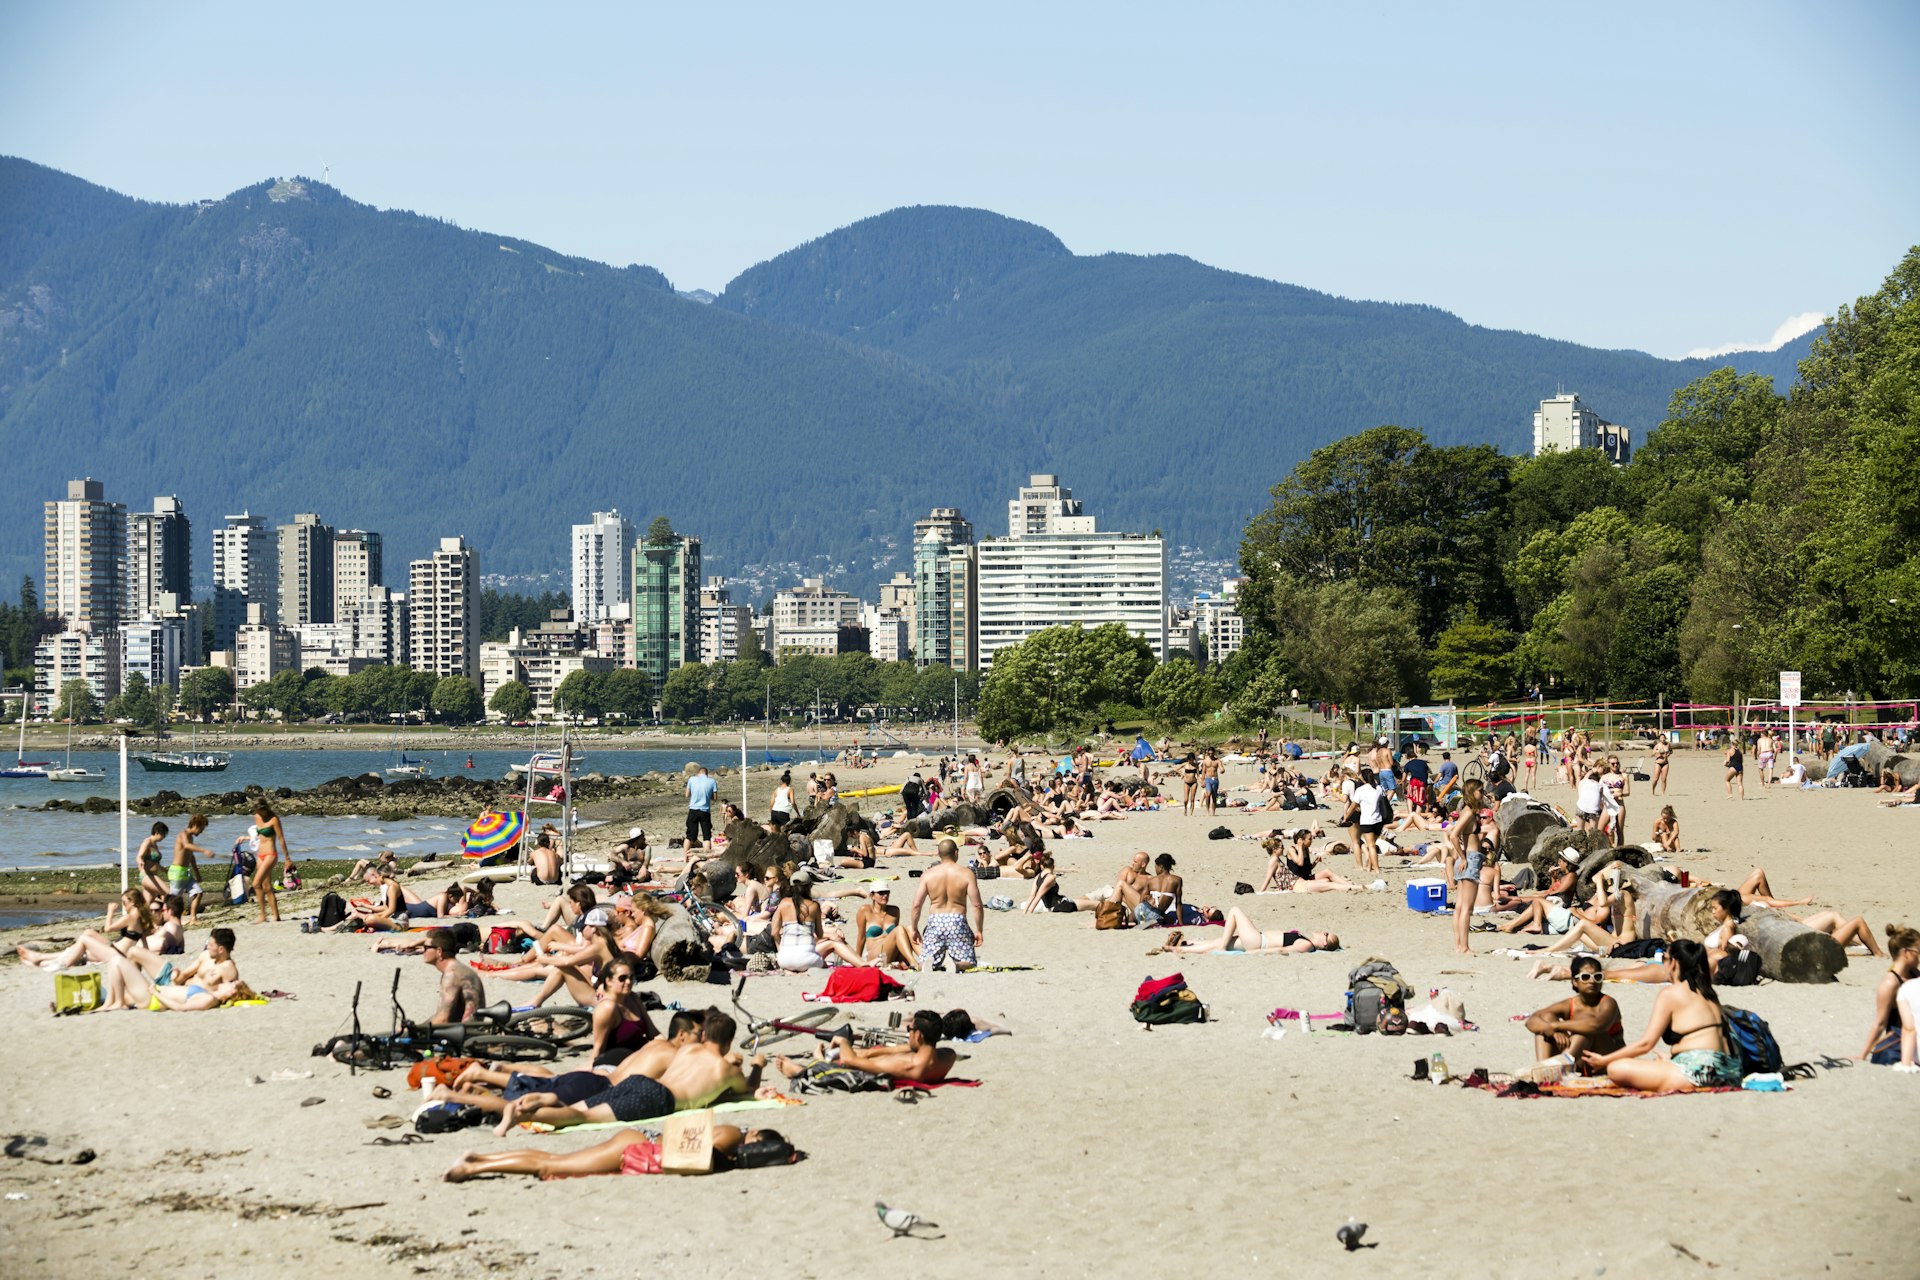 People sunbathe and chat in groups on a beach near an urban area